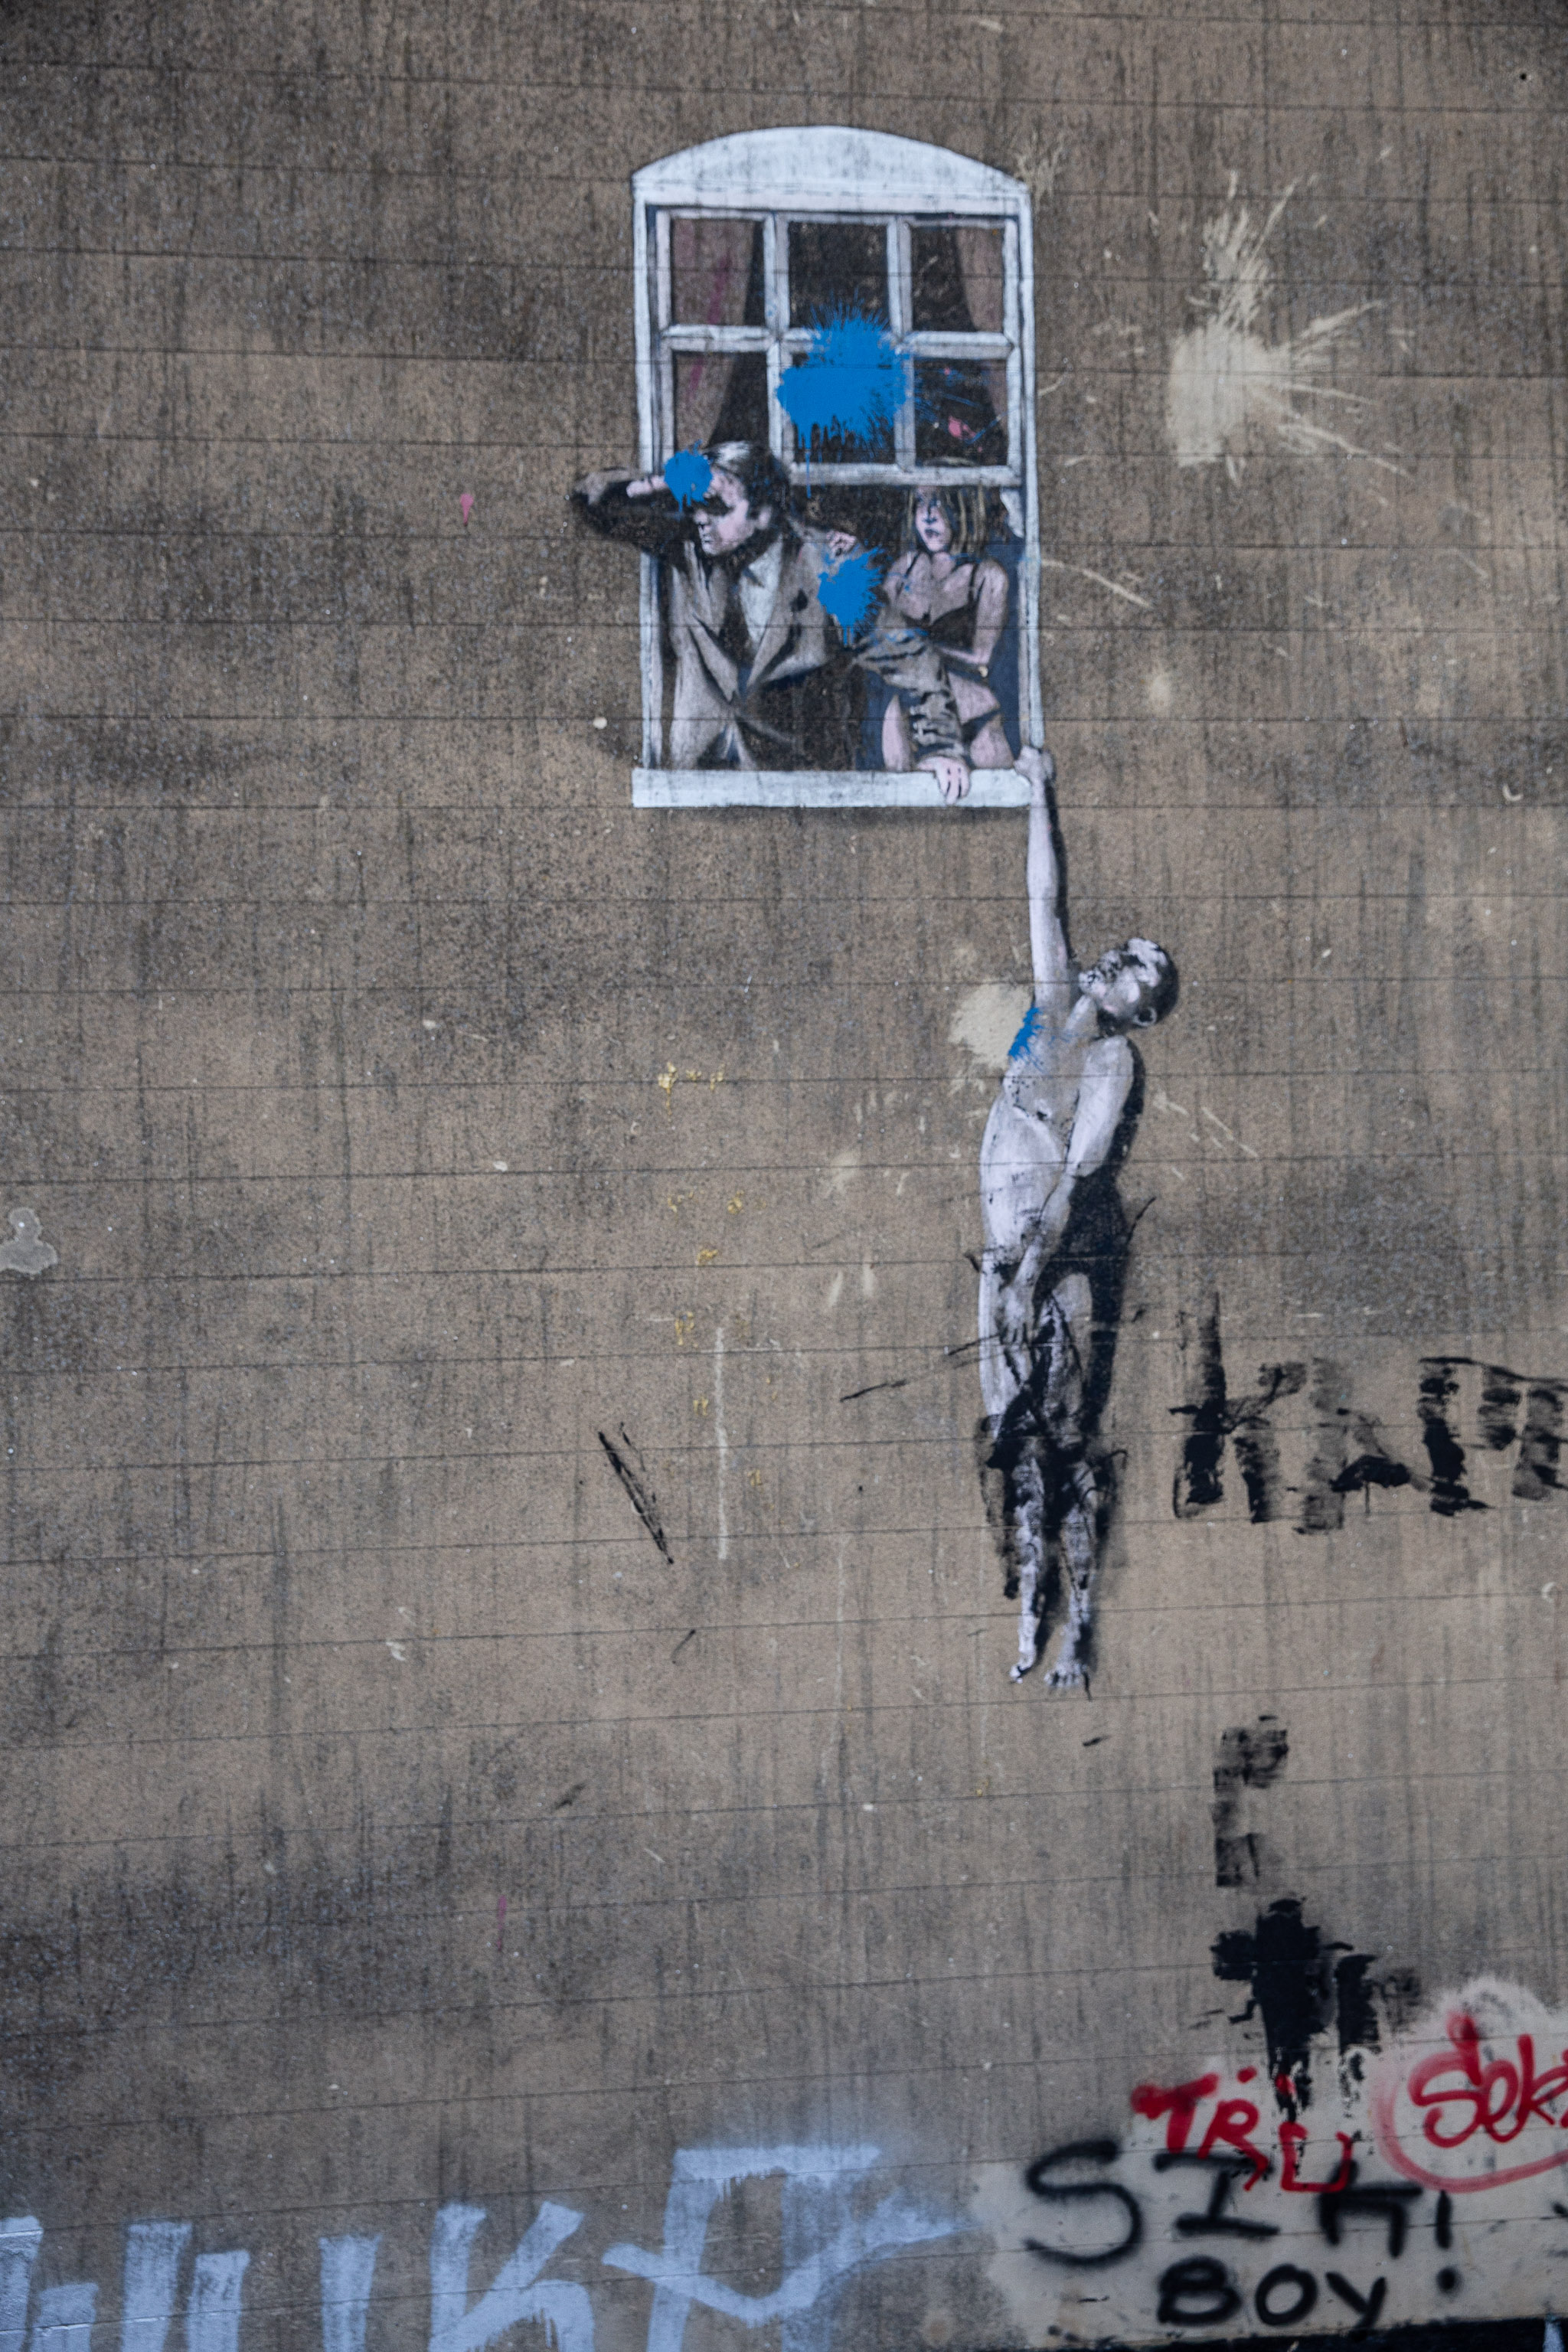 Banksy
It's seen better day. Virtually every Banksy appears to be either vandalised or stolen as soon as it turns up in Bristol these days. Wikipedia even...